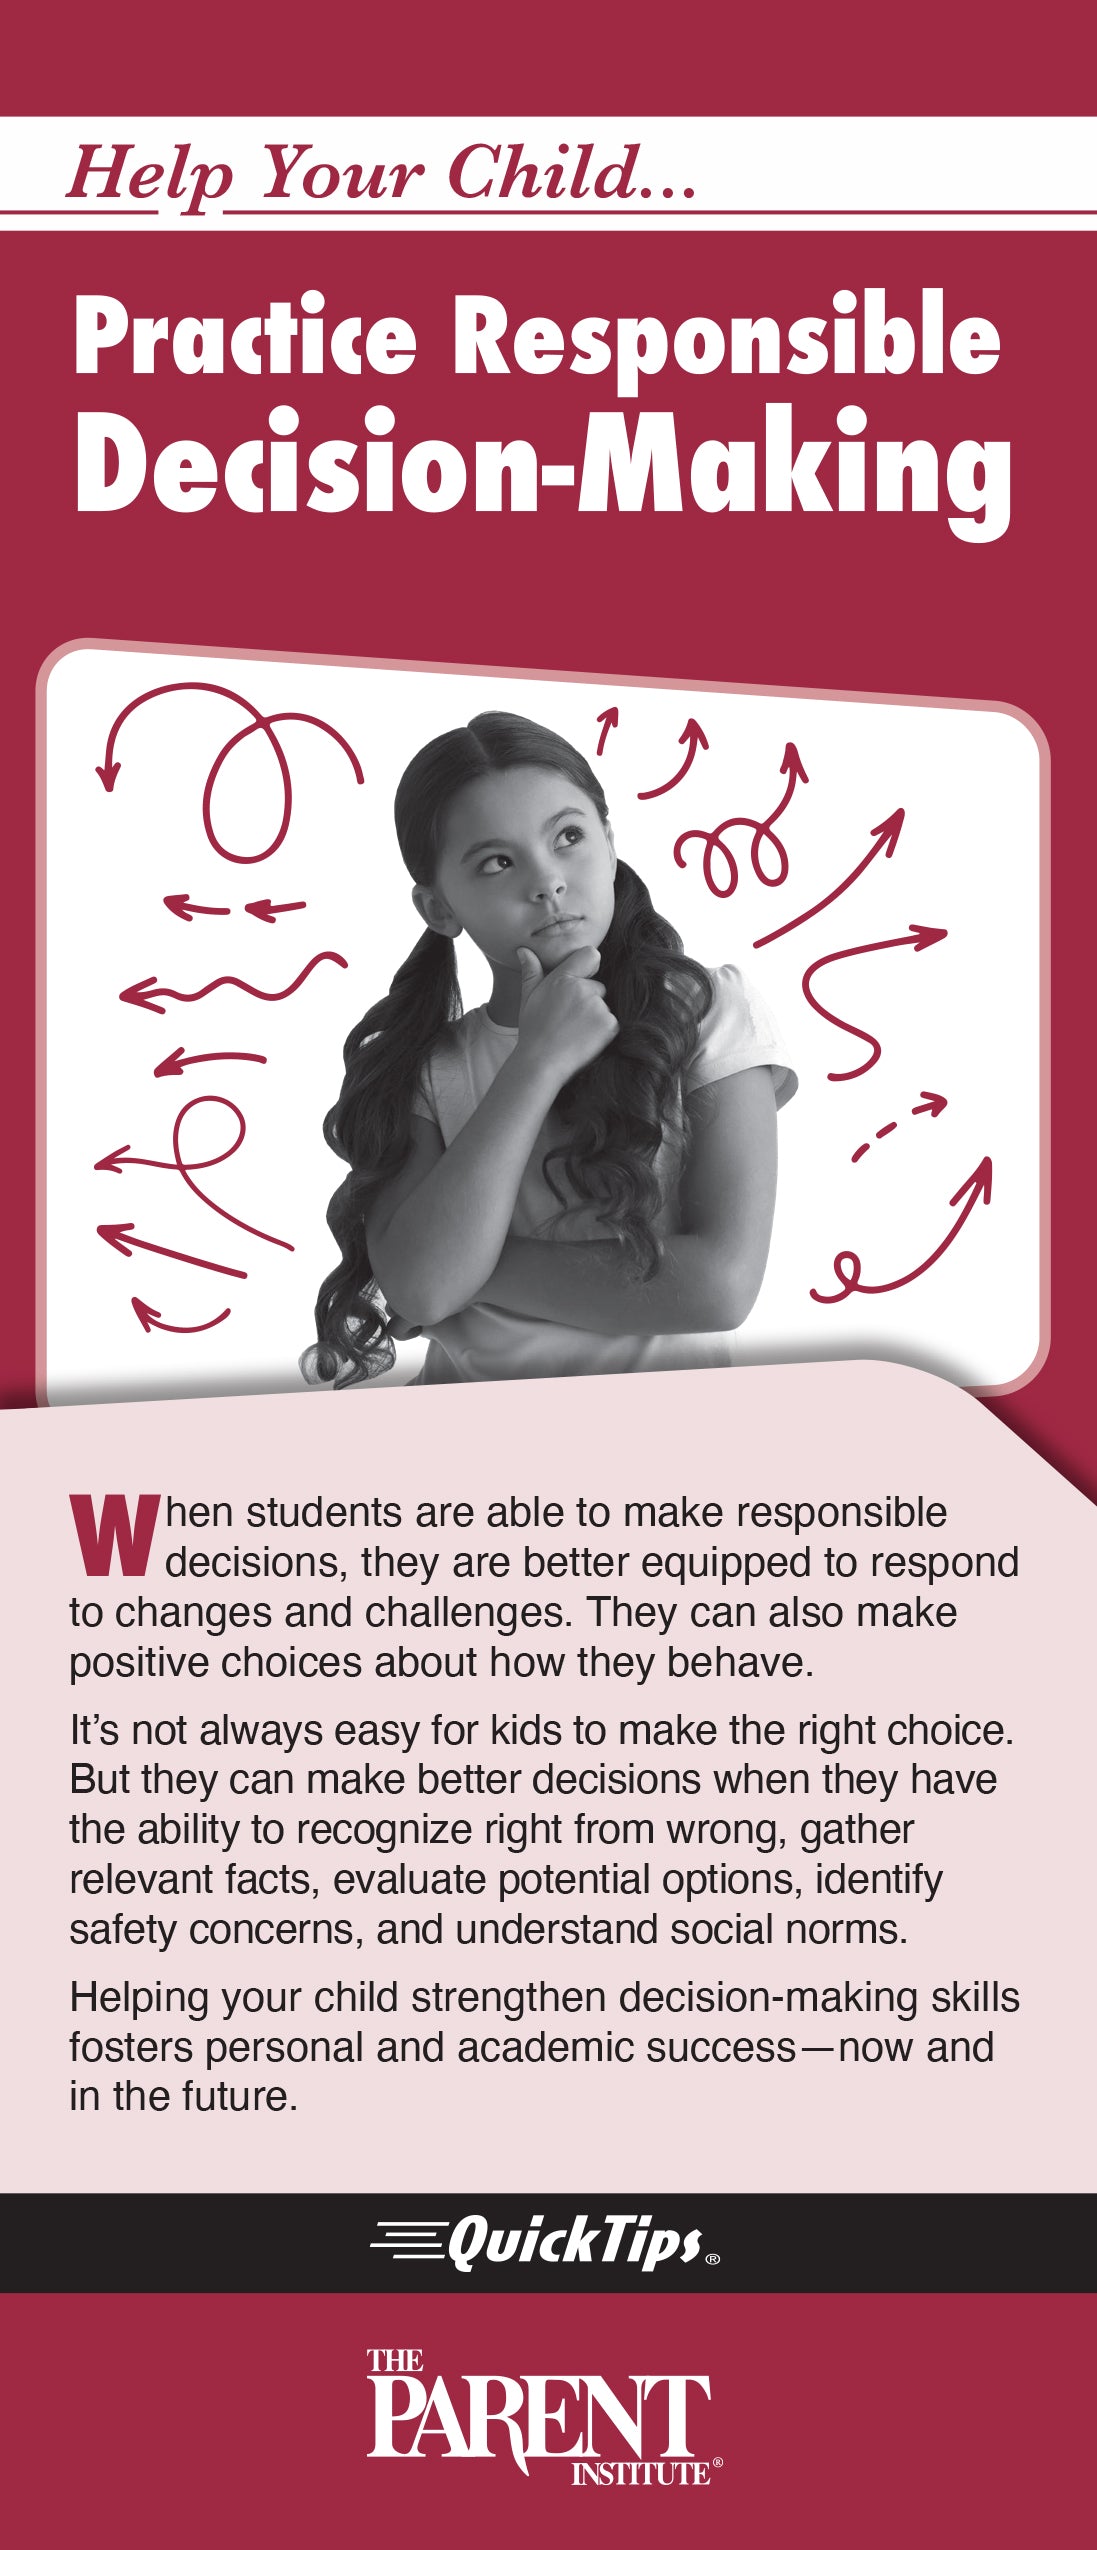 Help Your Child Practice Responsible Decision-Making